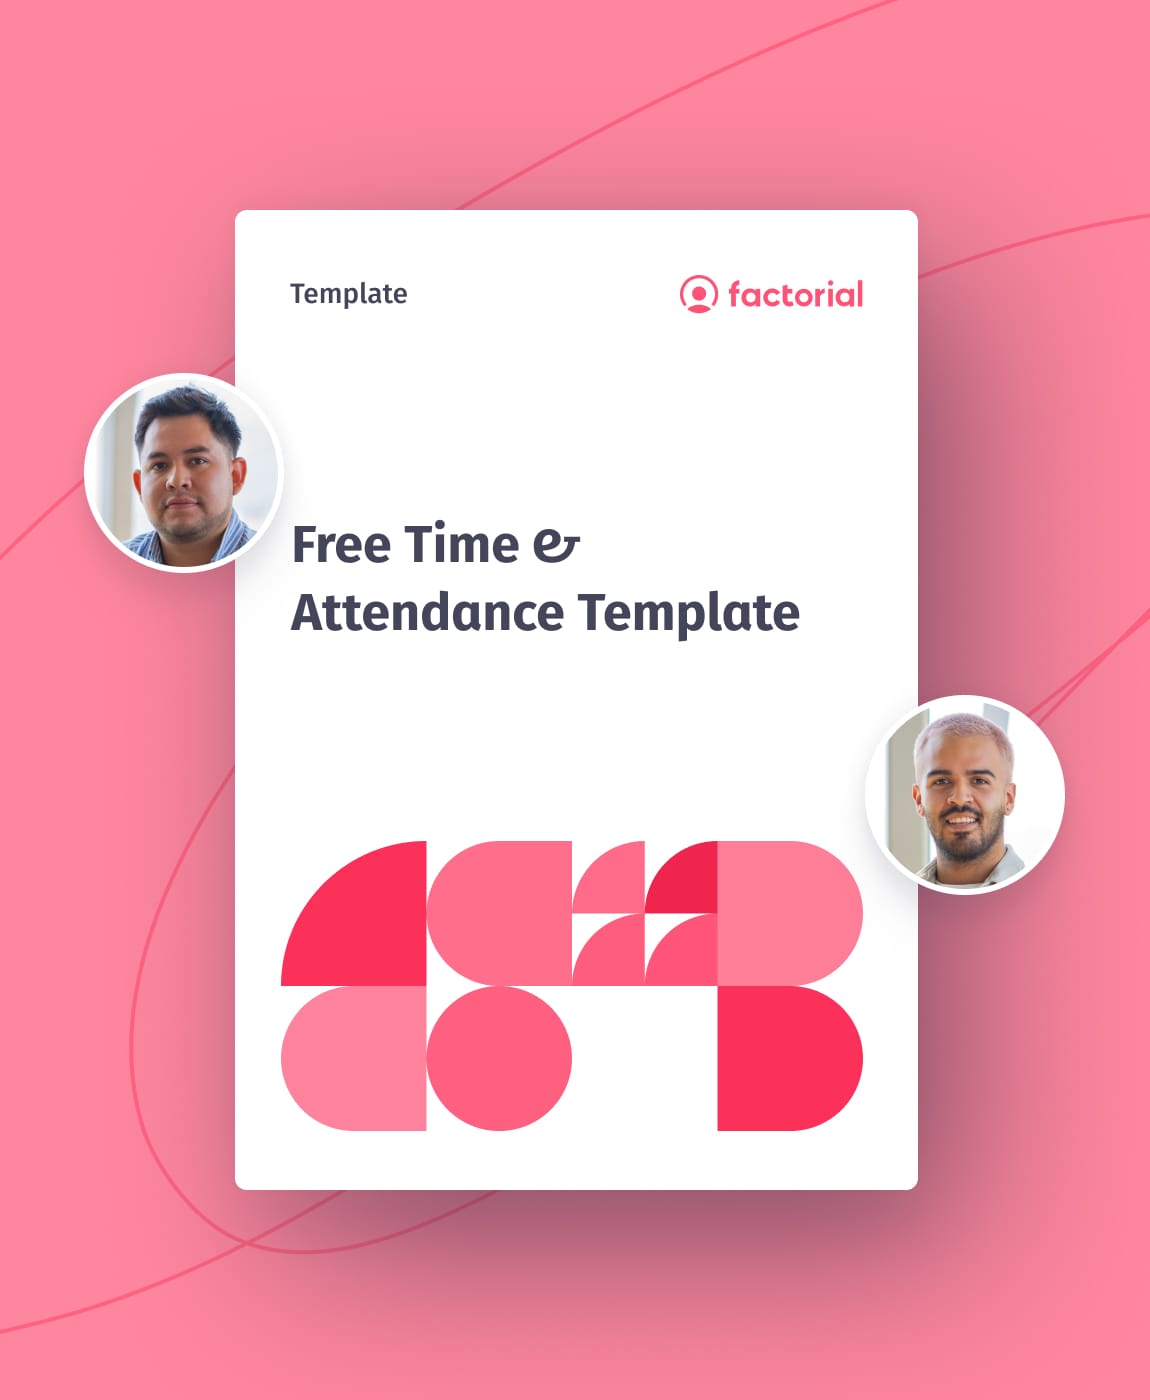 Free Time & Attendance Template